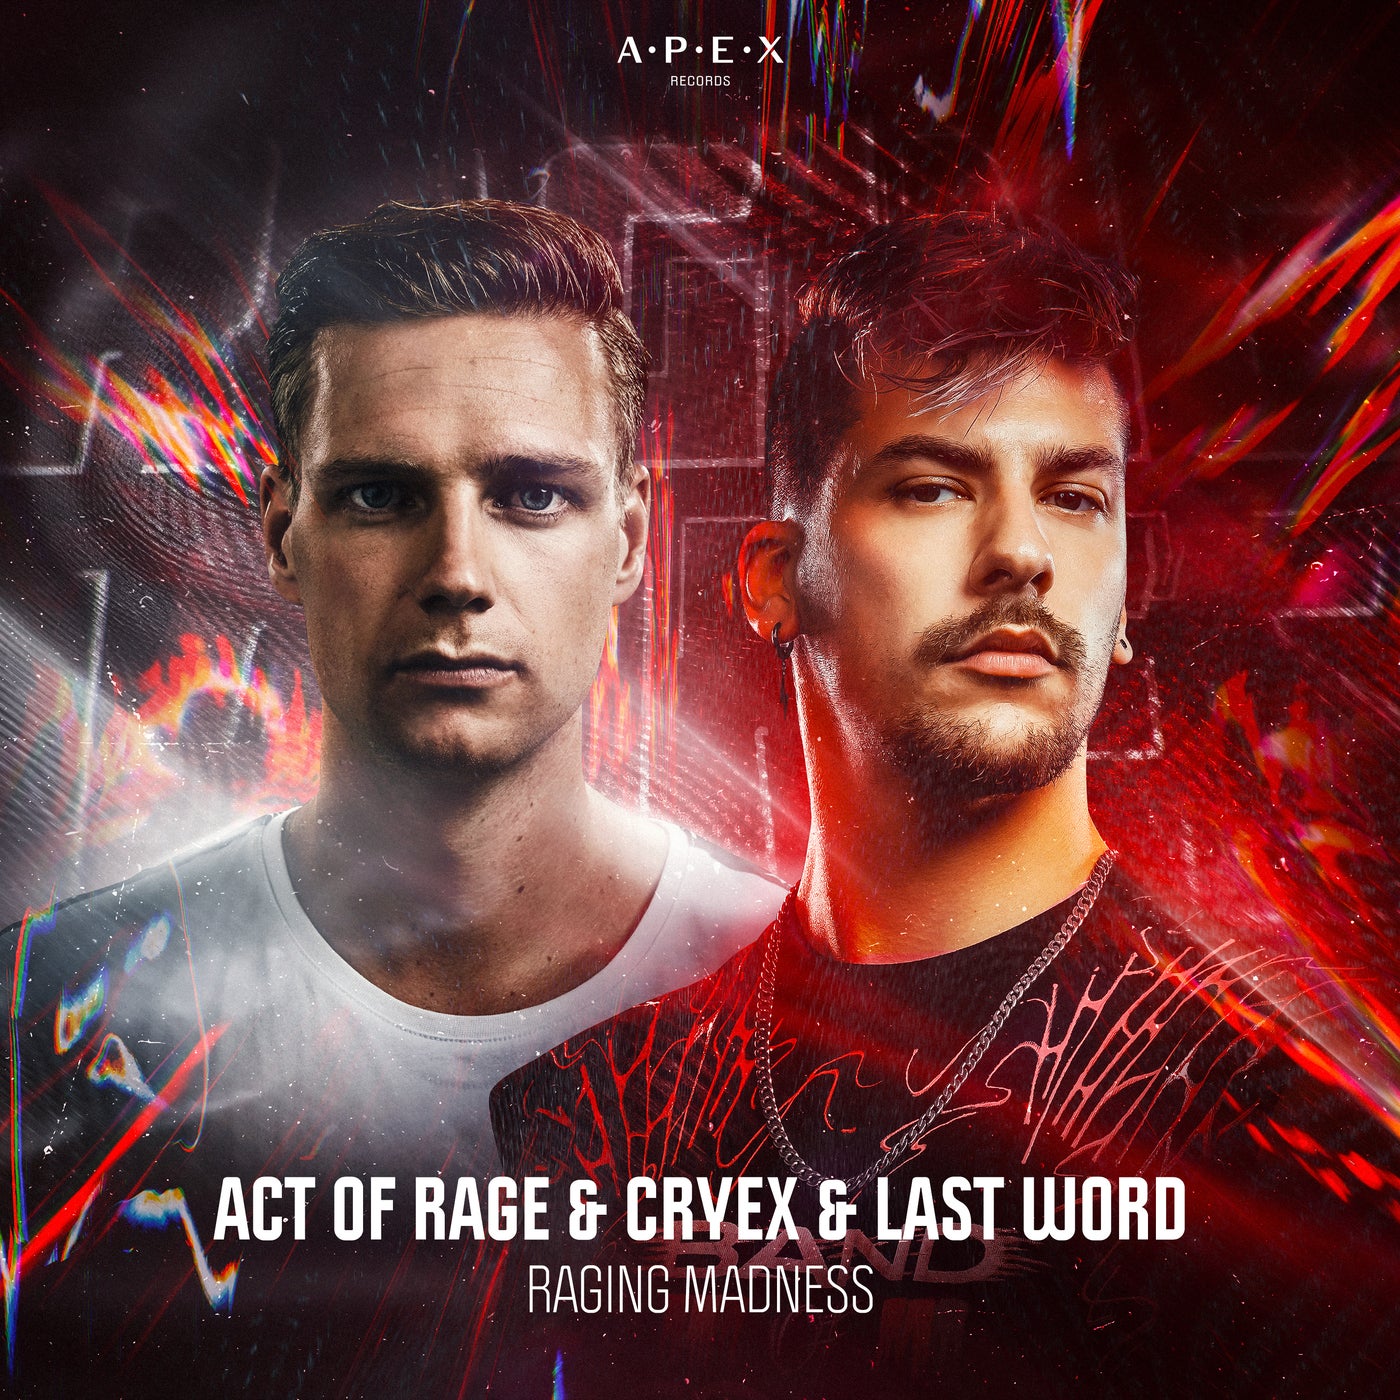 Cover - Act of rage, Cryex, Last Word - Raging Madness (Original Mix)